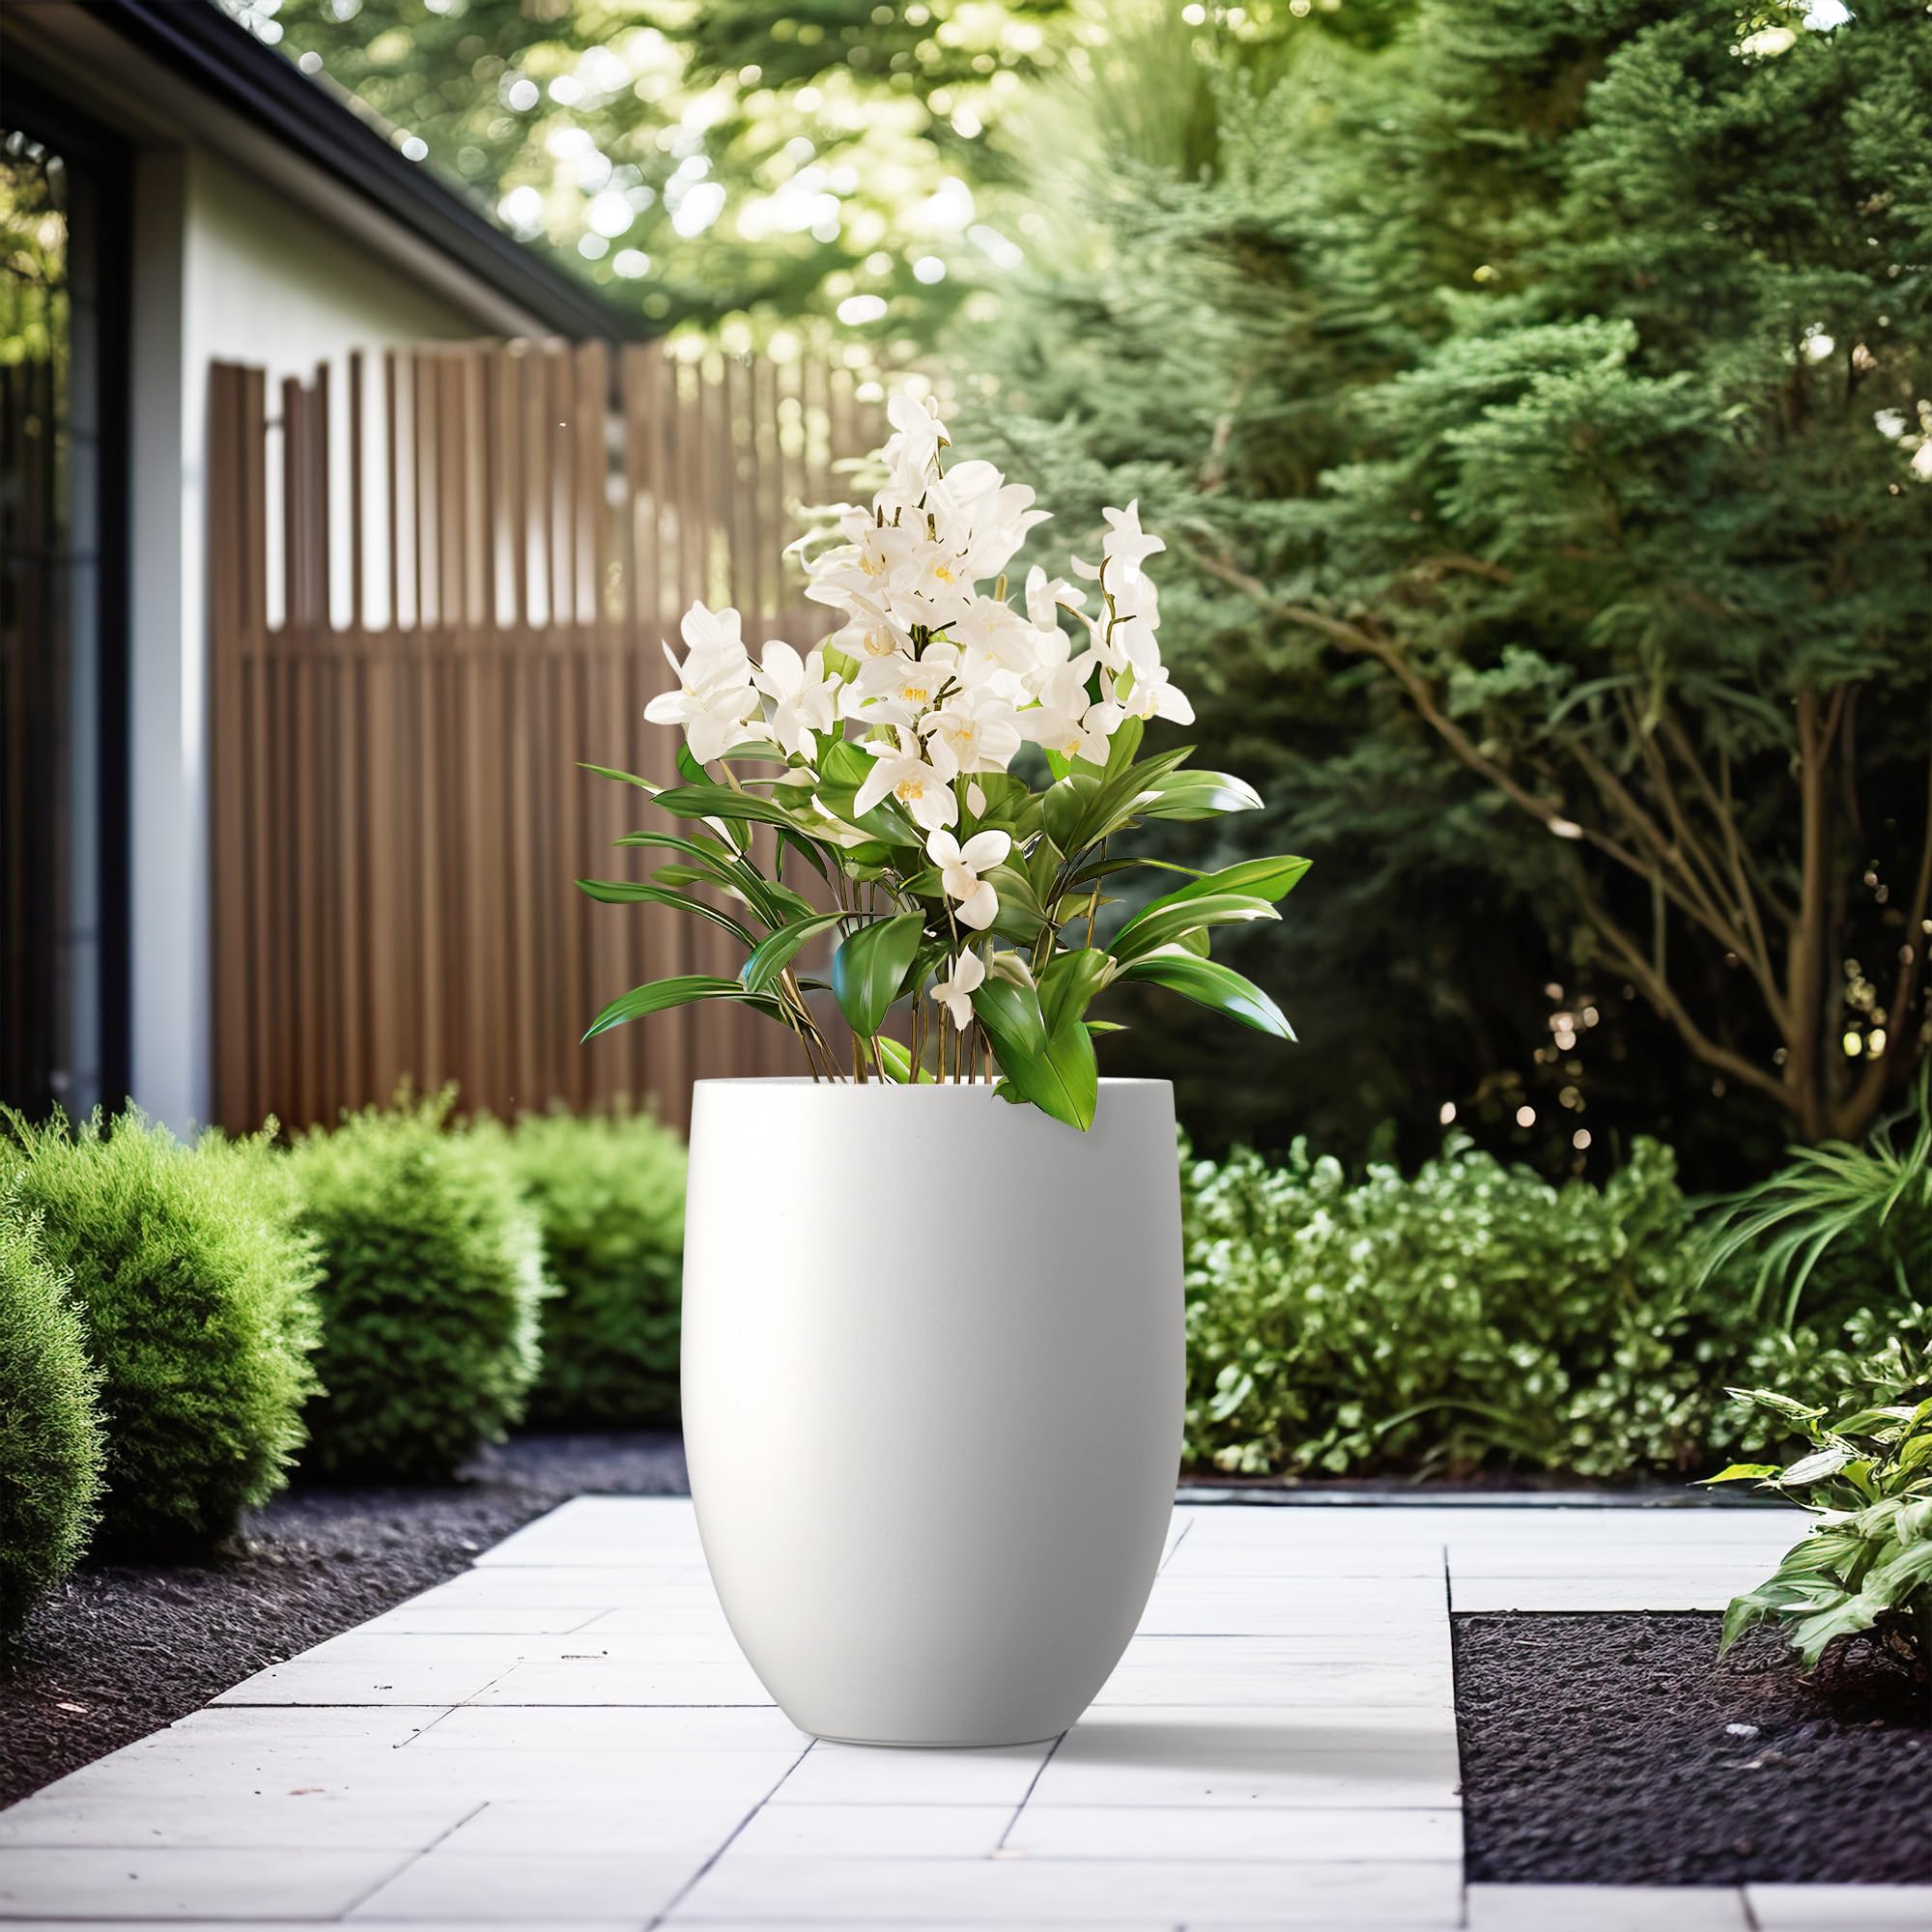 Kante 21.7" H Pure White Concrete Tall Planter, Large Outdoor Indoor Decorative Pot with Drainage Hole and Rubber Plug, Modern Round Style for Home and Patio